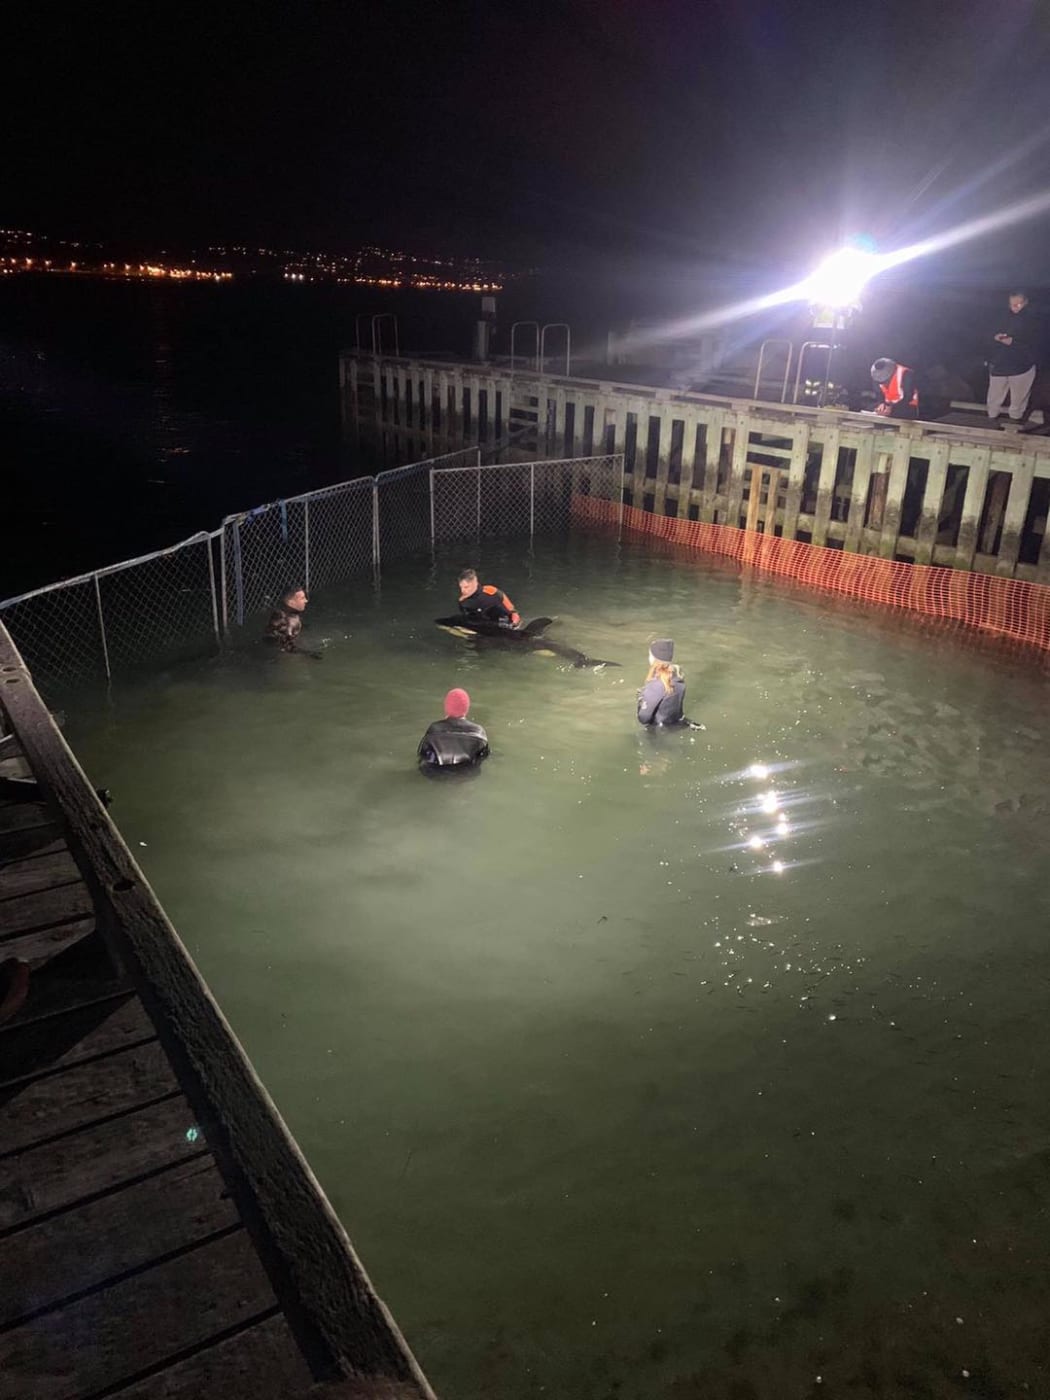 The orca is currently in a temporary pen, using the boat ramp and fencing, and is being cared for around-the-clock by volunteers